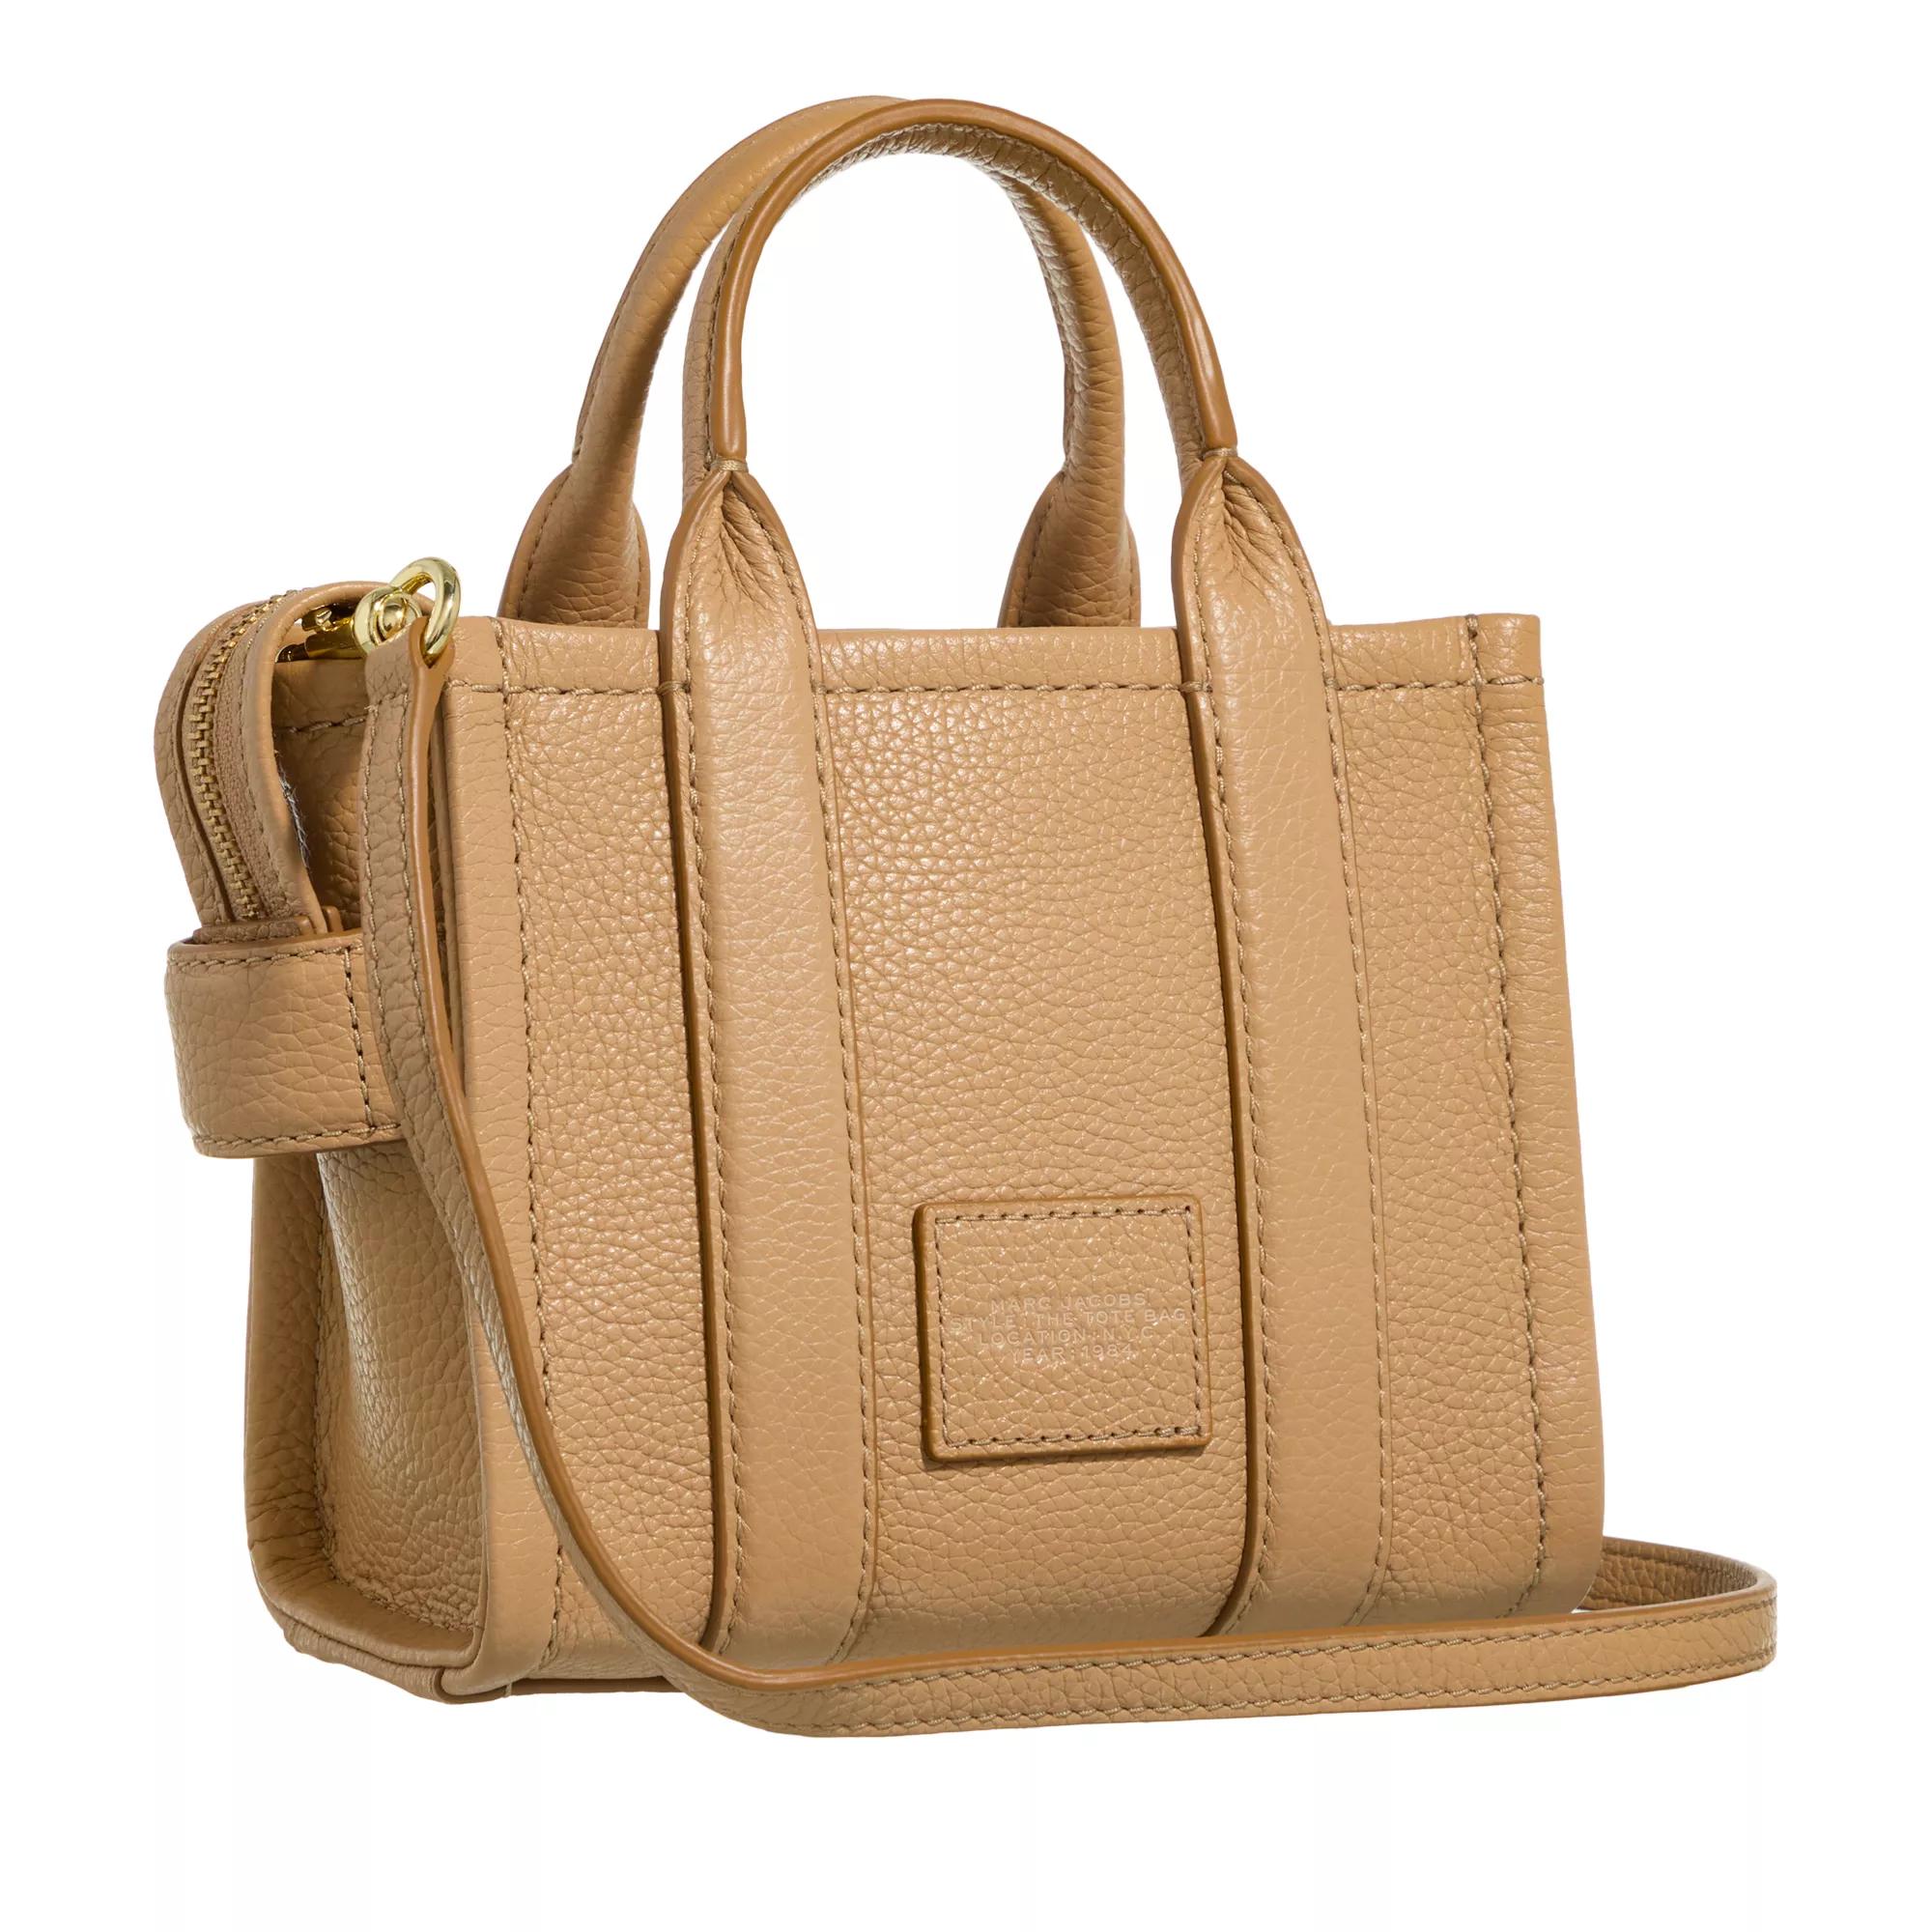 Marc Jacobs Totes The Mini Tote in beige